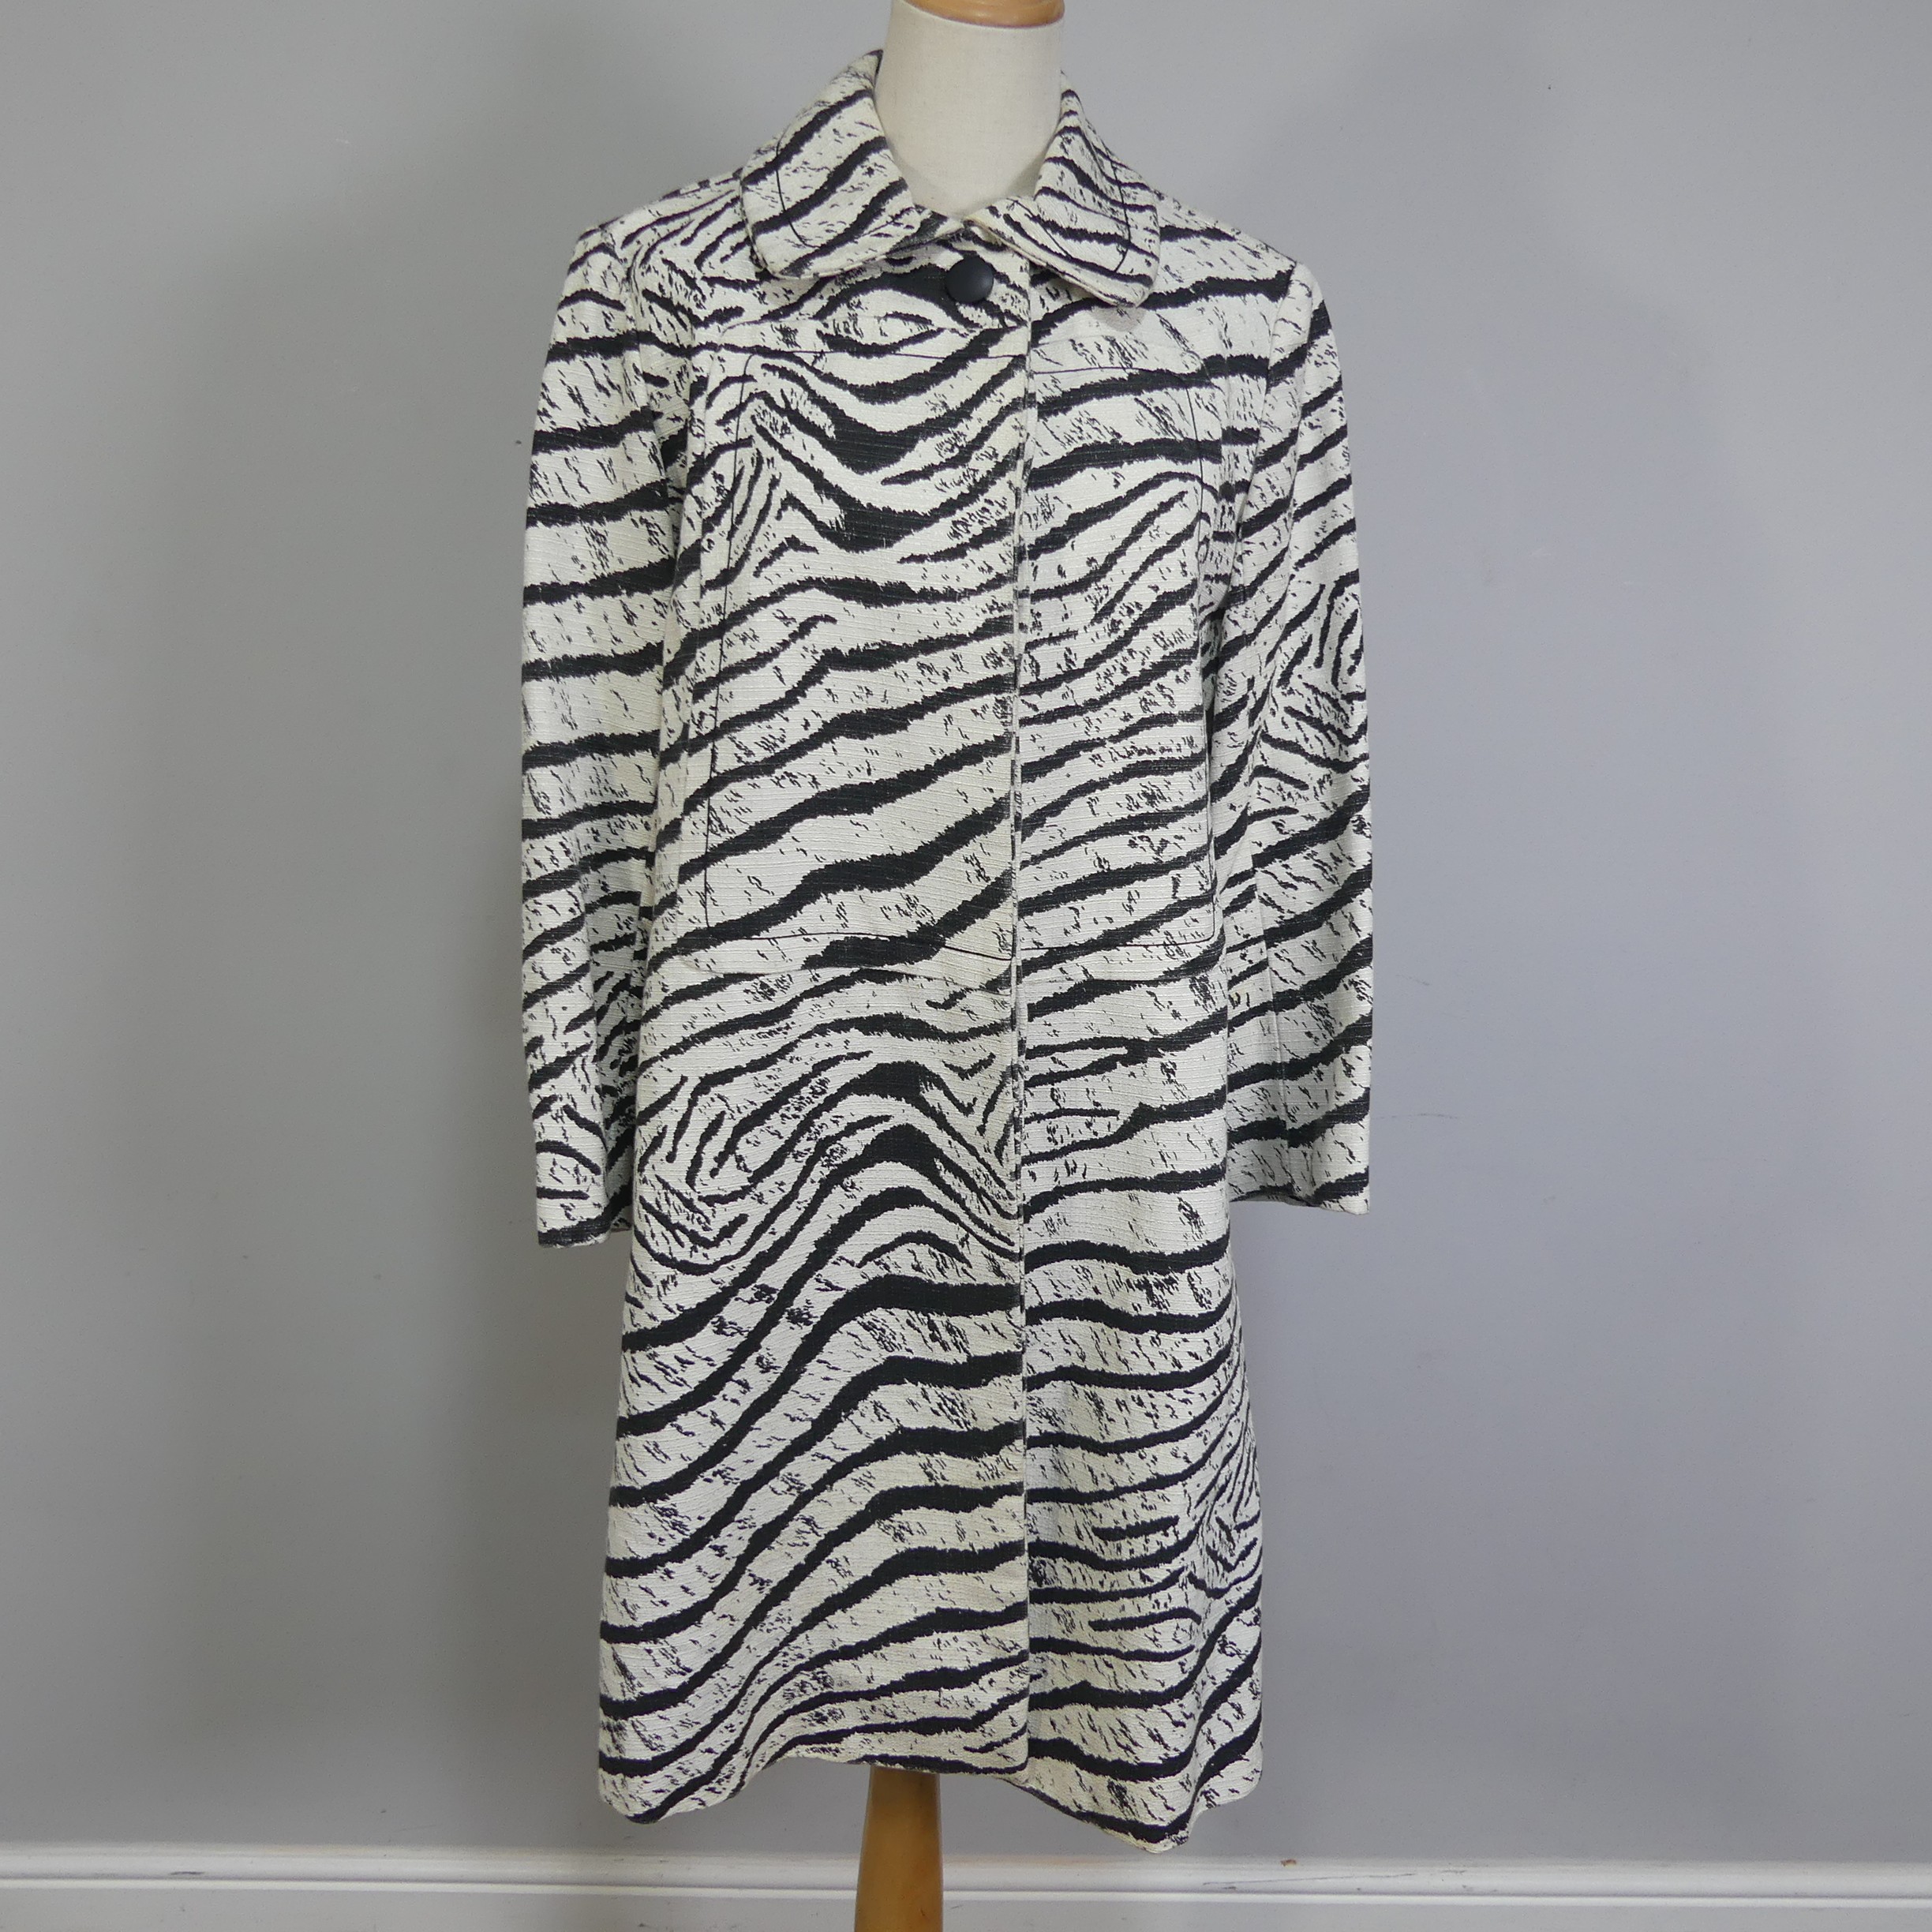 Vintage Fashion Tailoring, circa 1960s; a black and white zebra print Trench Coat, in a heavy slub - Image 4 of 7